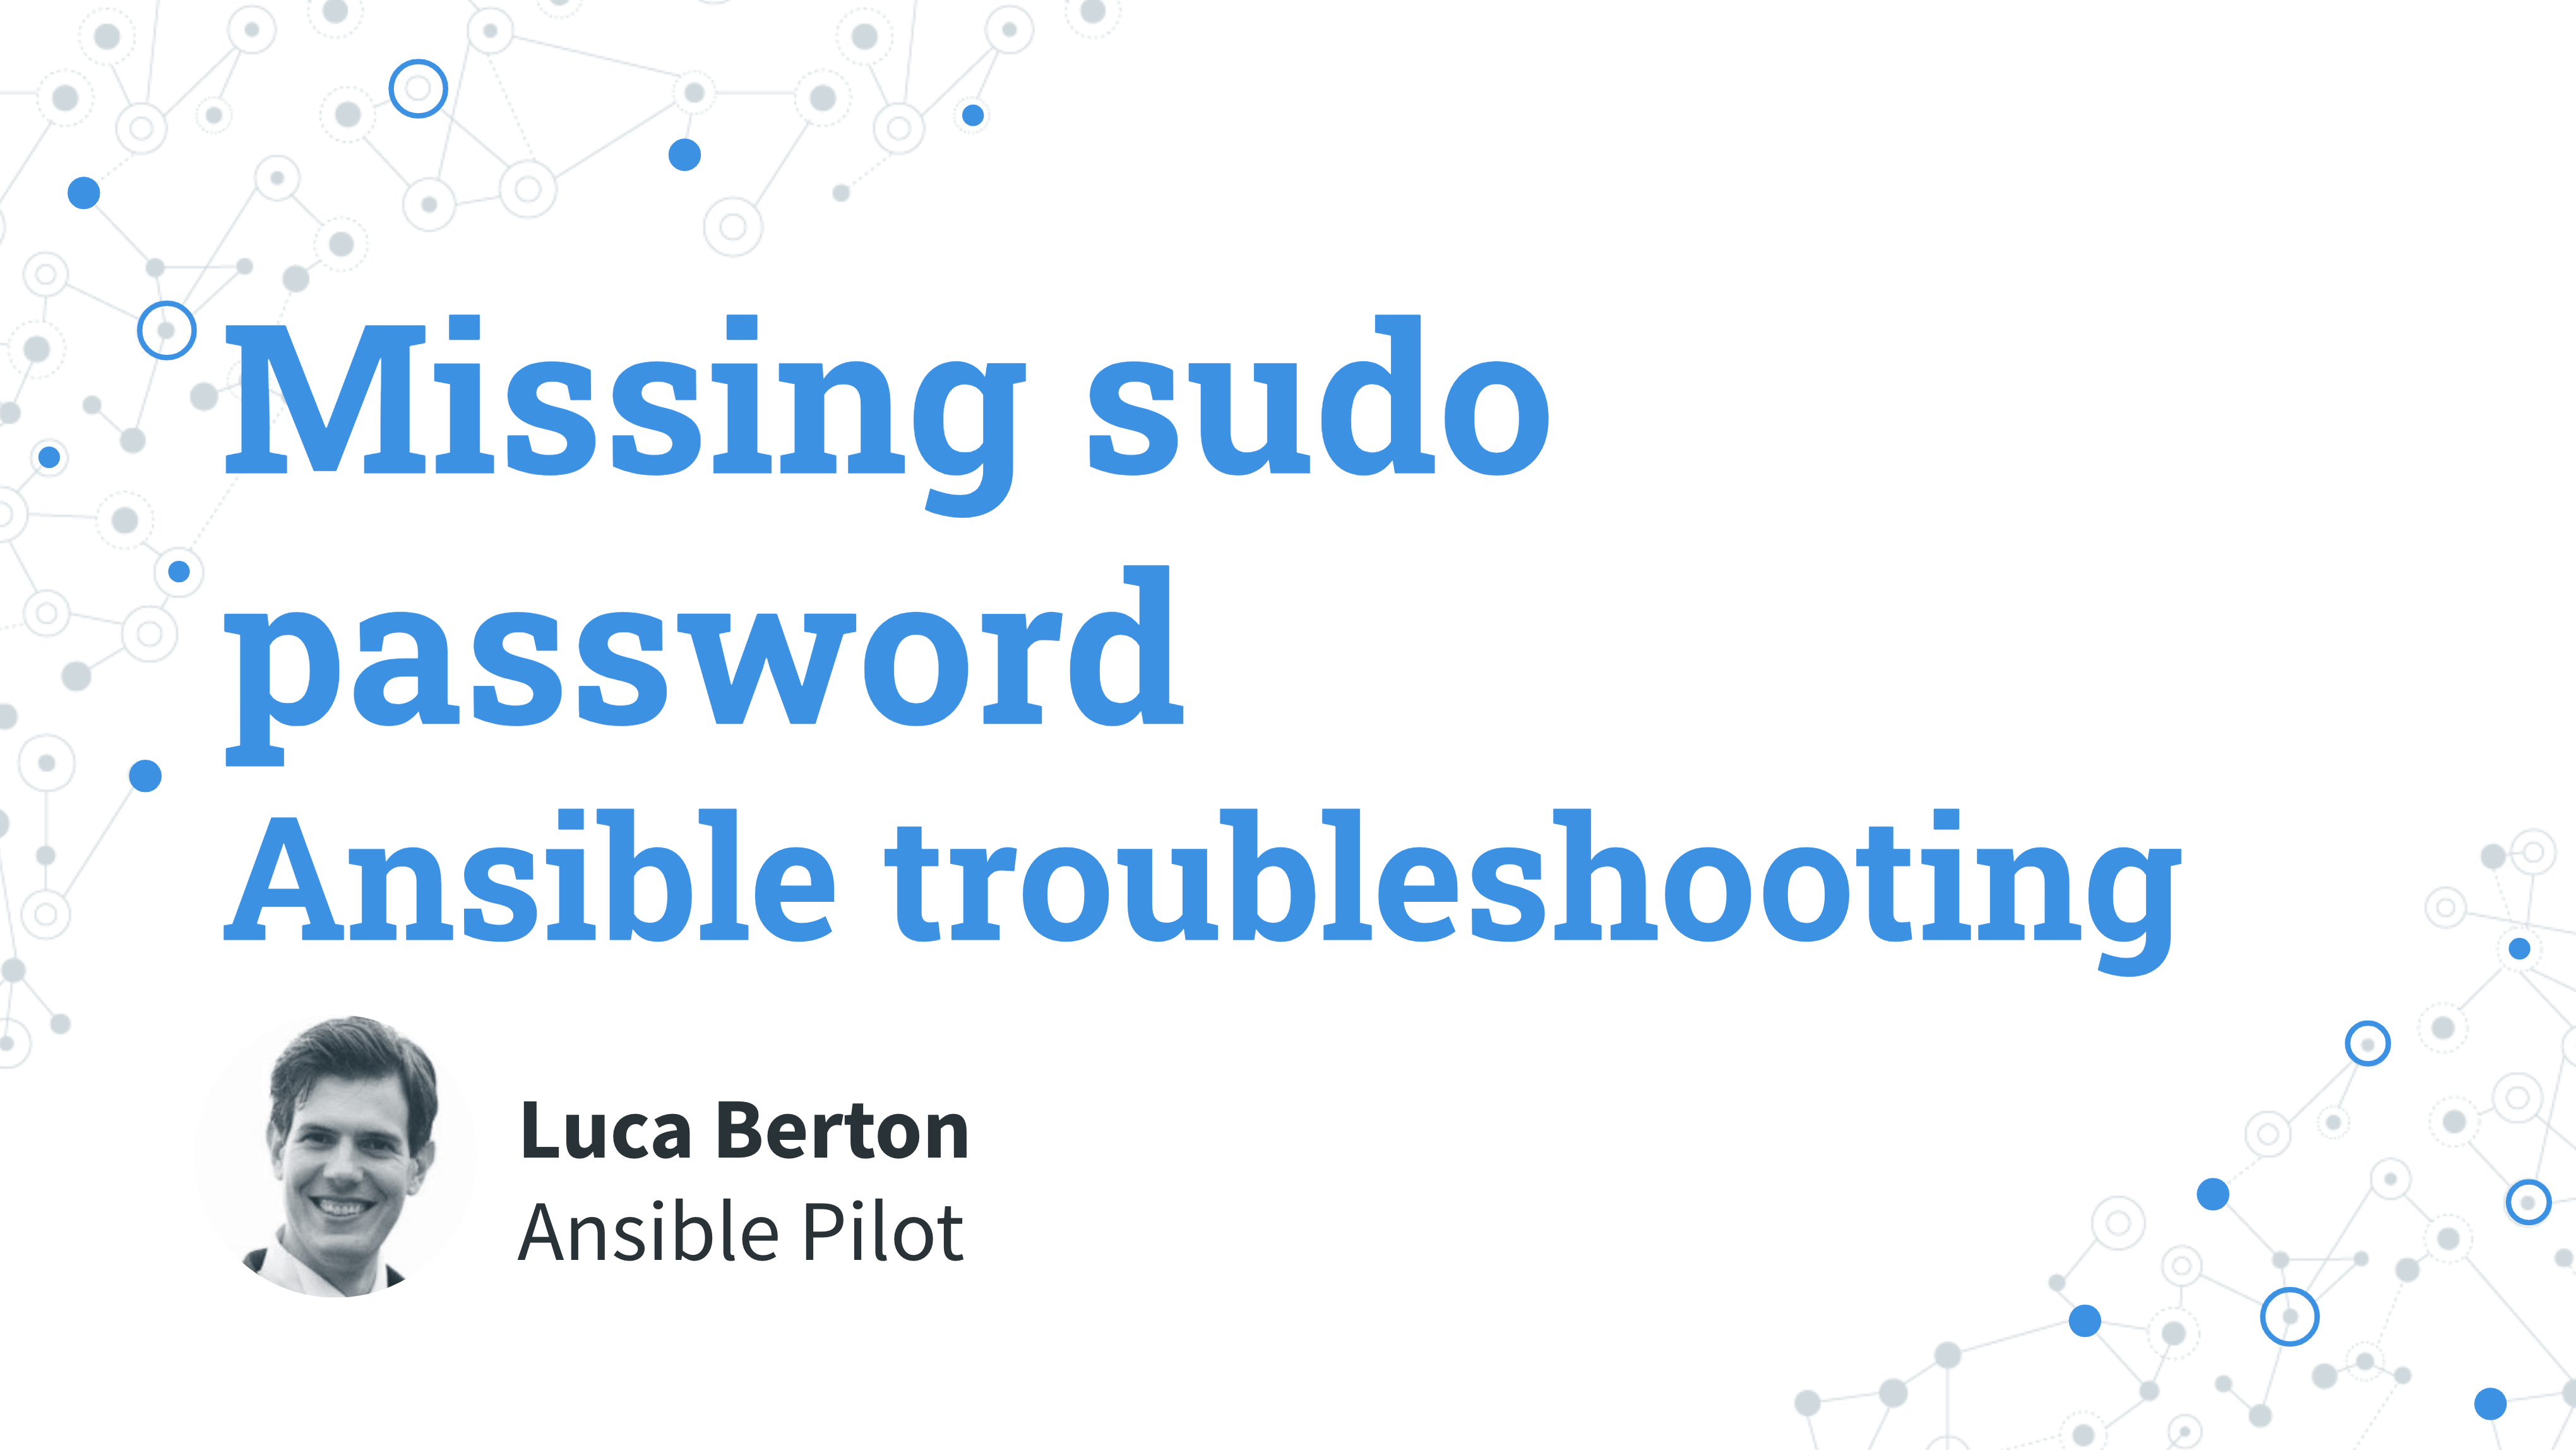 Ansible troubleshooting - missing sudo password and incorrect sudo password